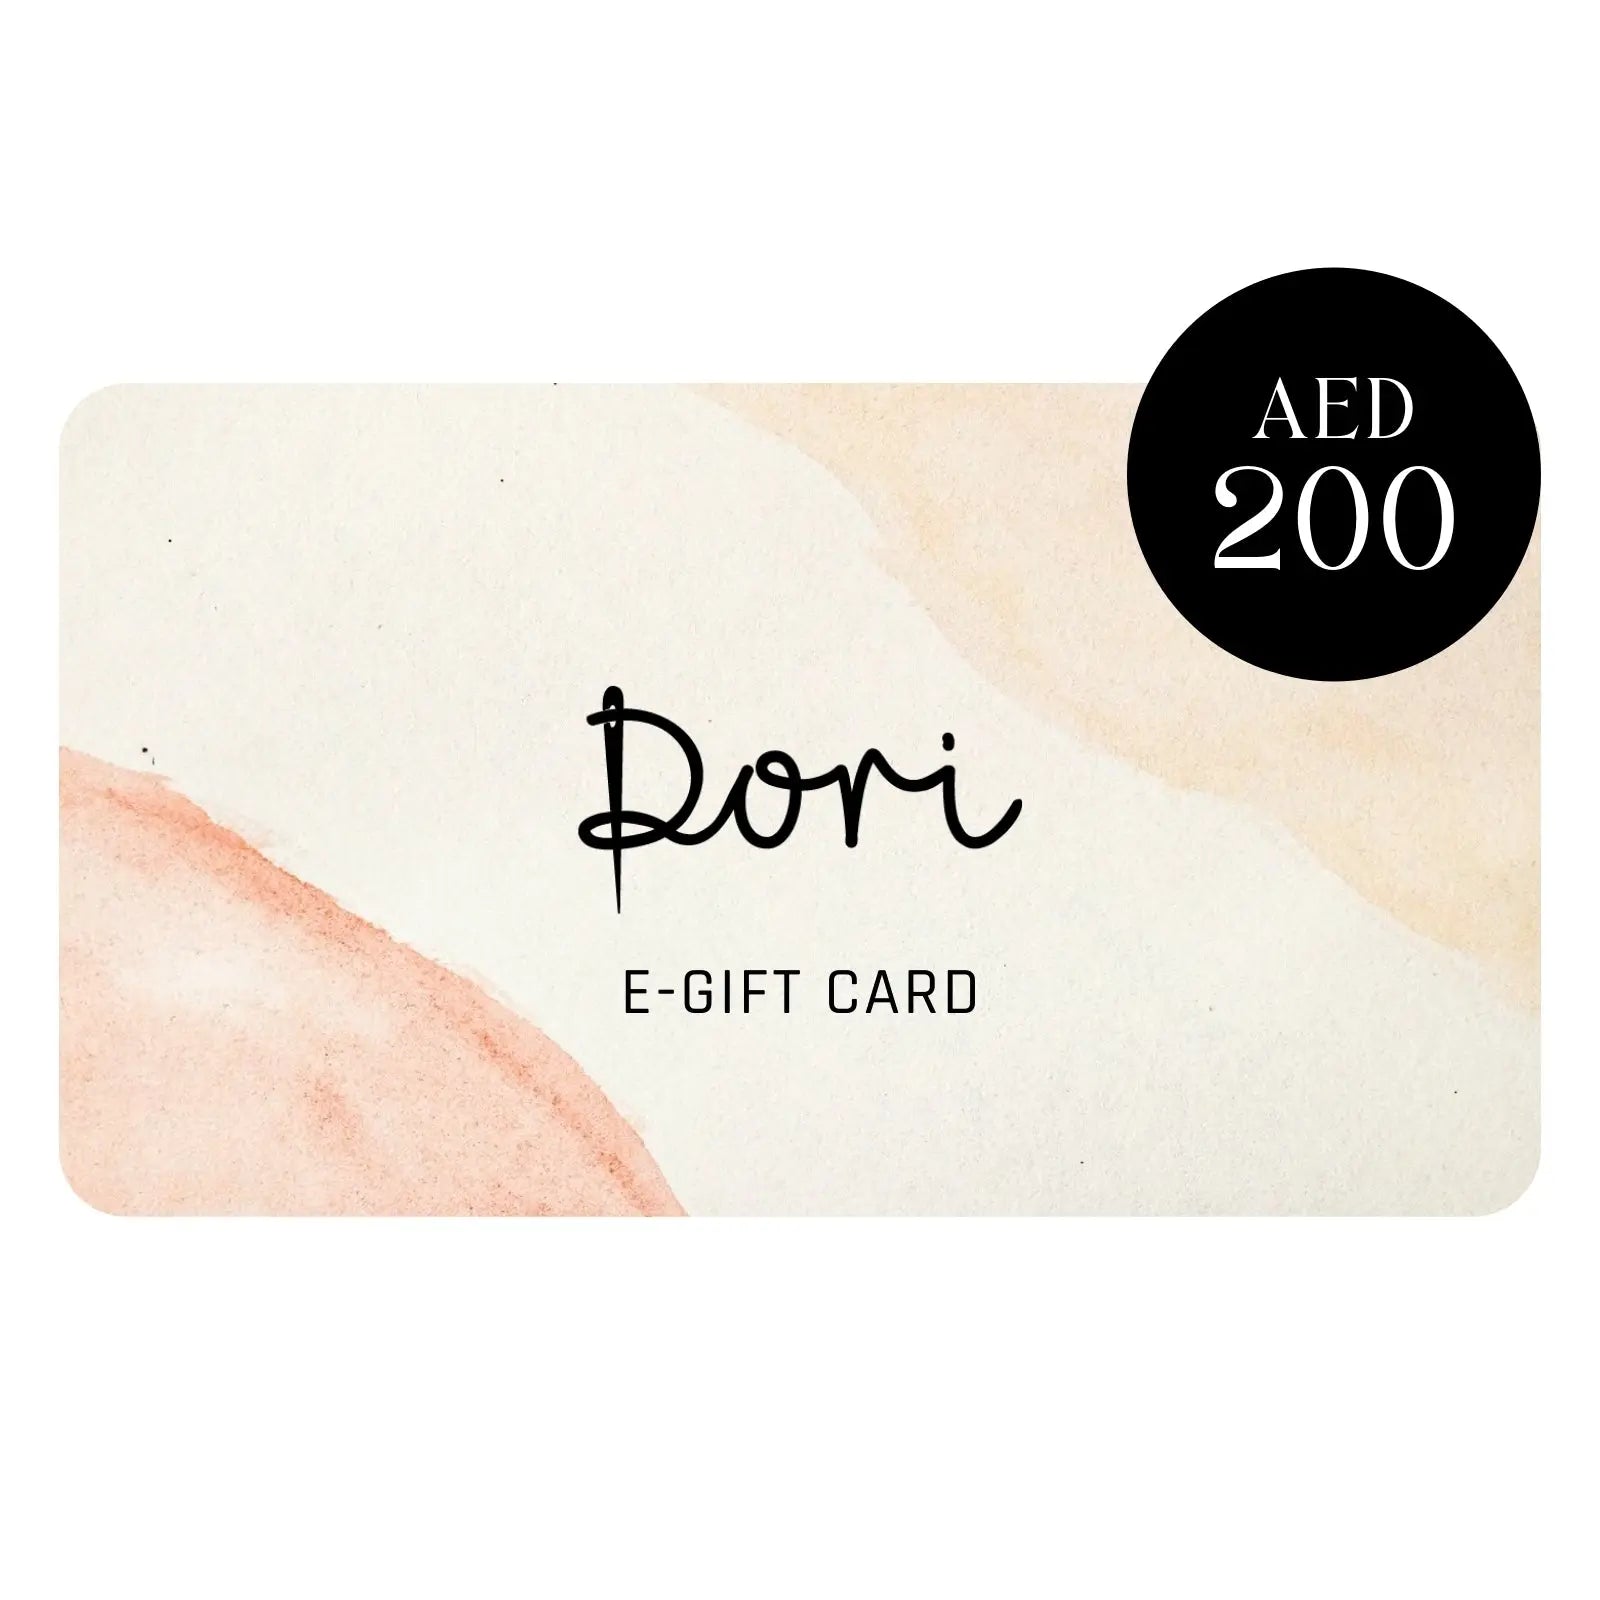 E-Gift Card (AED 200)- Handcrafted Jewellery from Dori